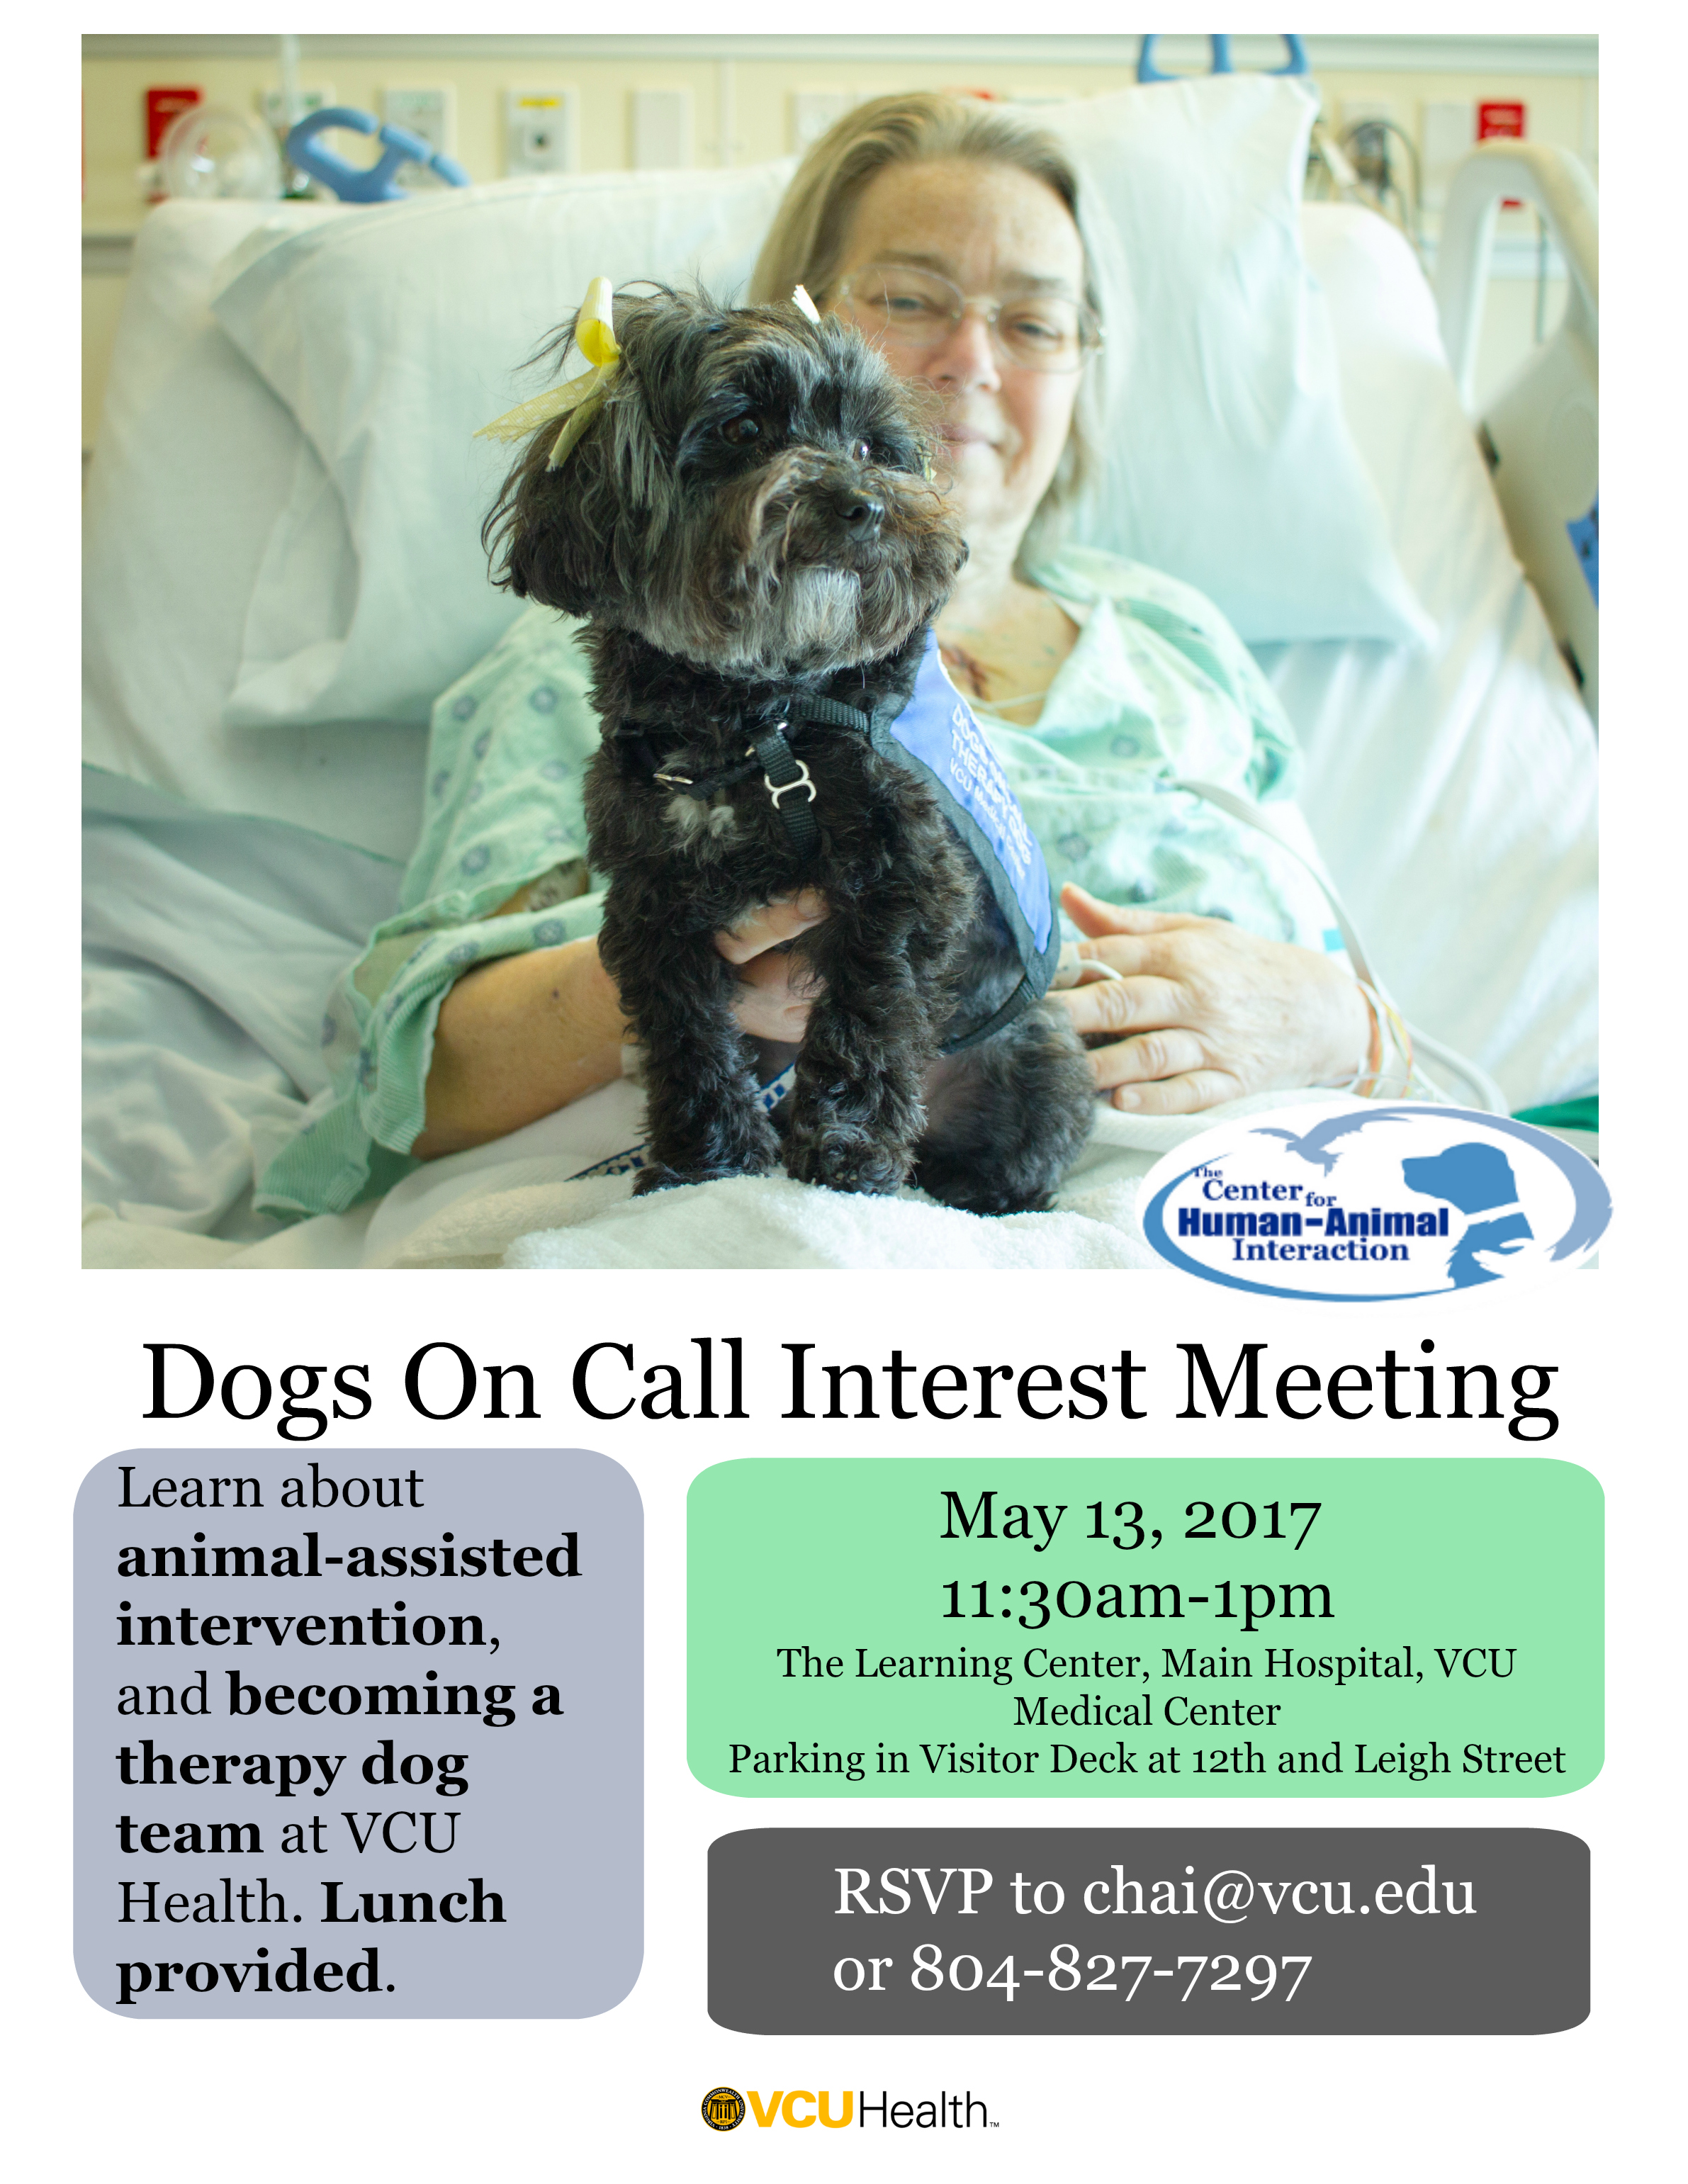 Dogs On Call 2017 Spring Interest Meeting